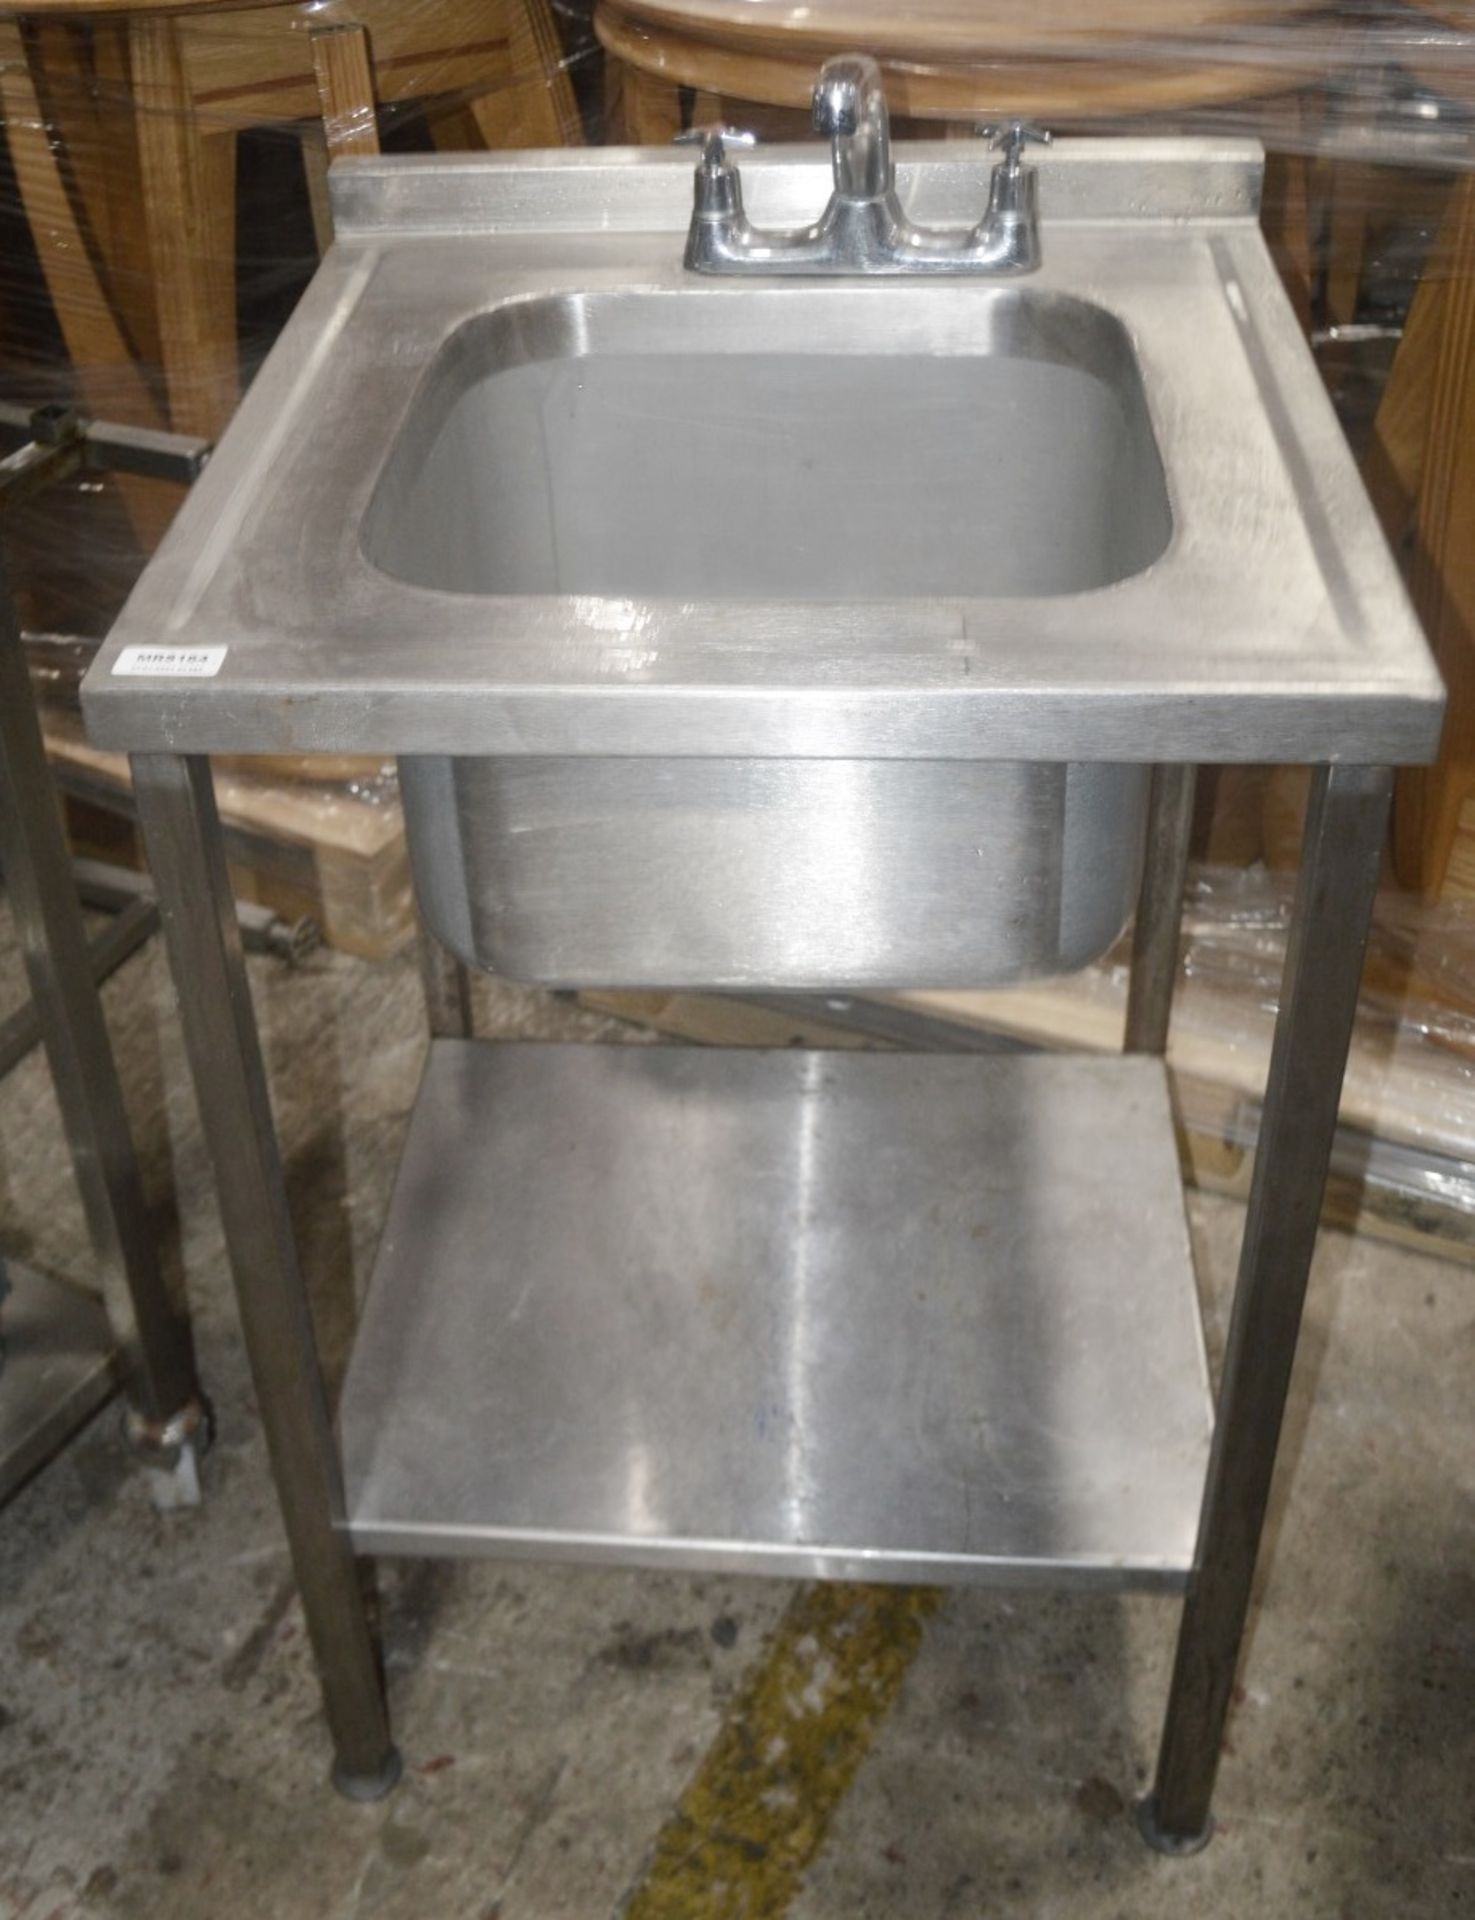 1 x Stainless Steel Commercial Kitchen Wash Station Sink Unit - Dimensions: H60 x W60 x D90cm - Very